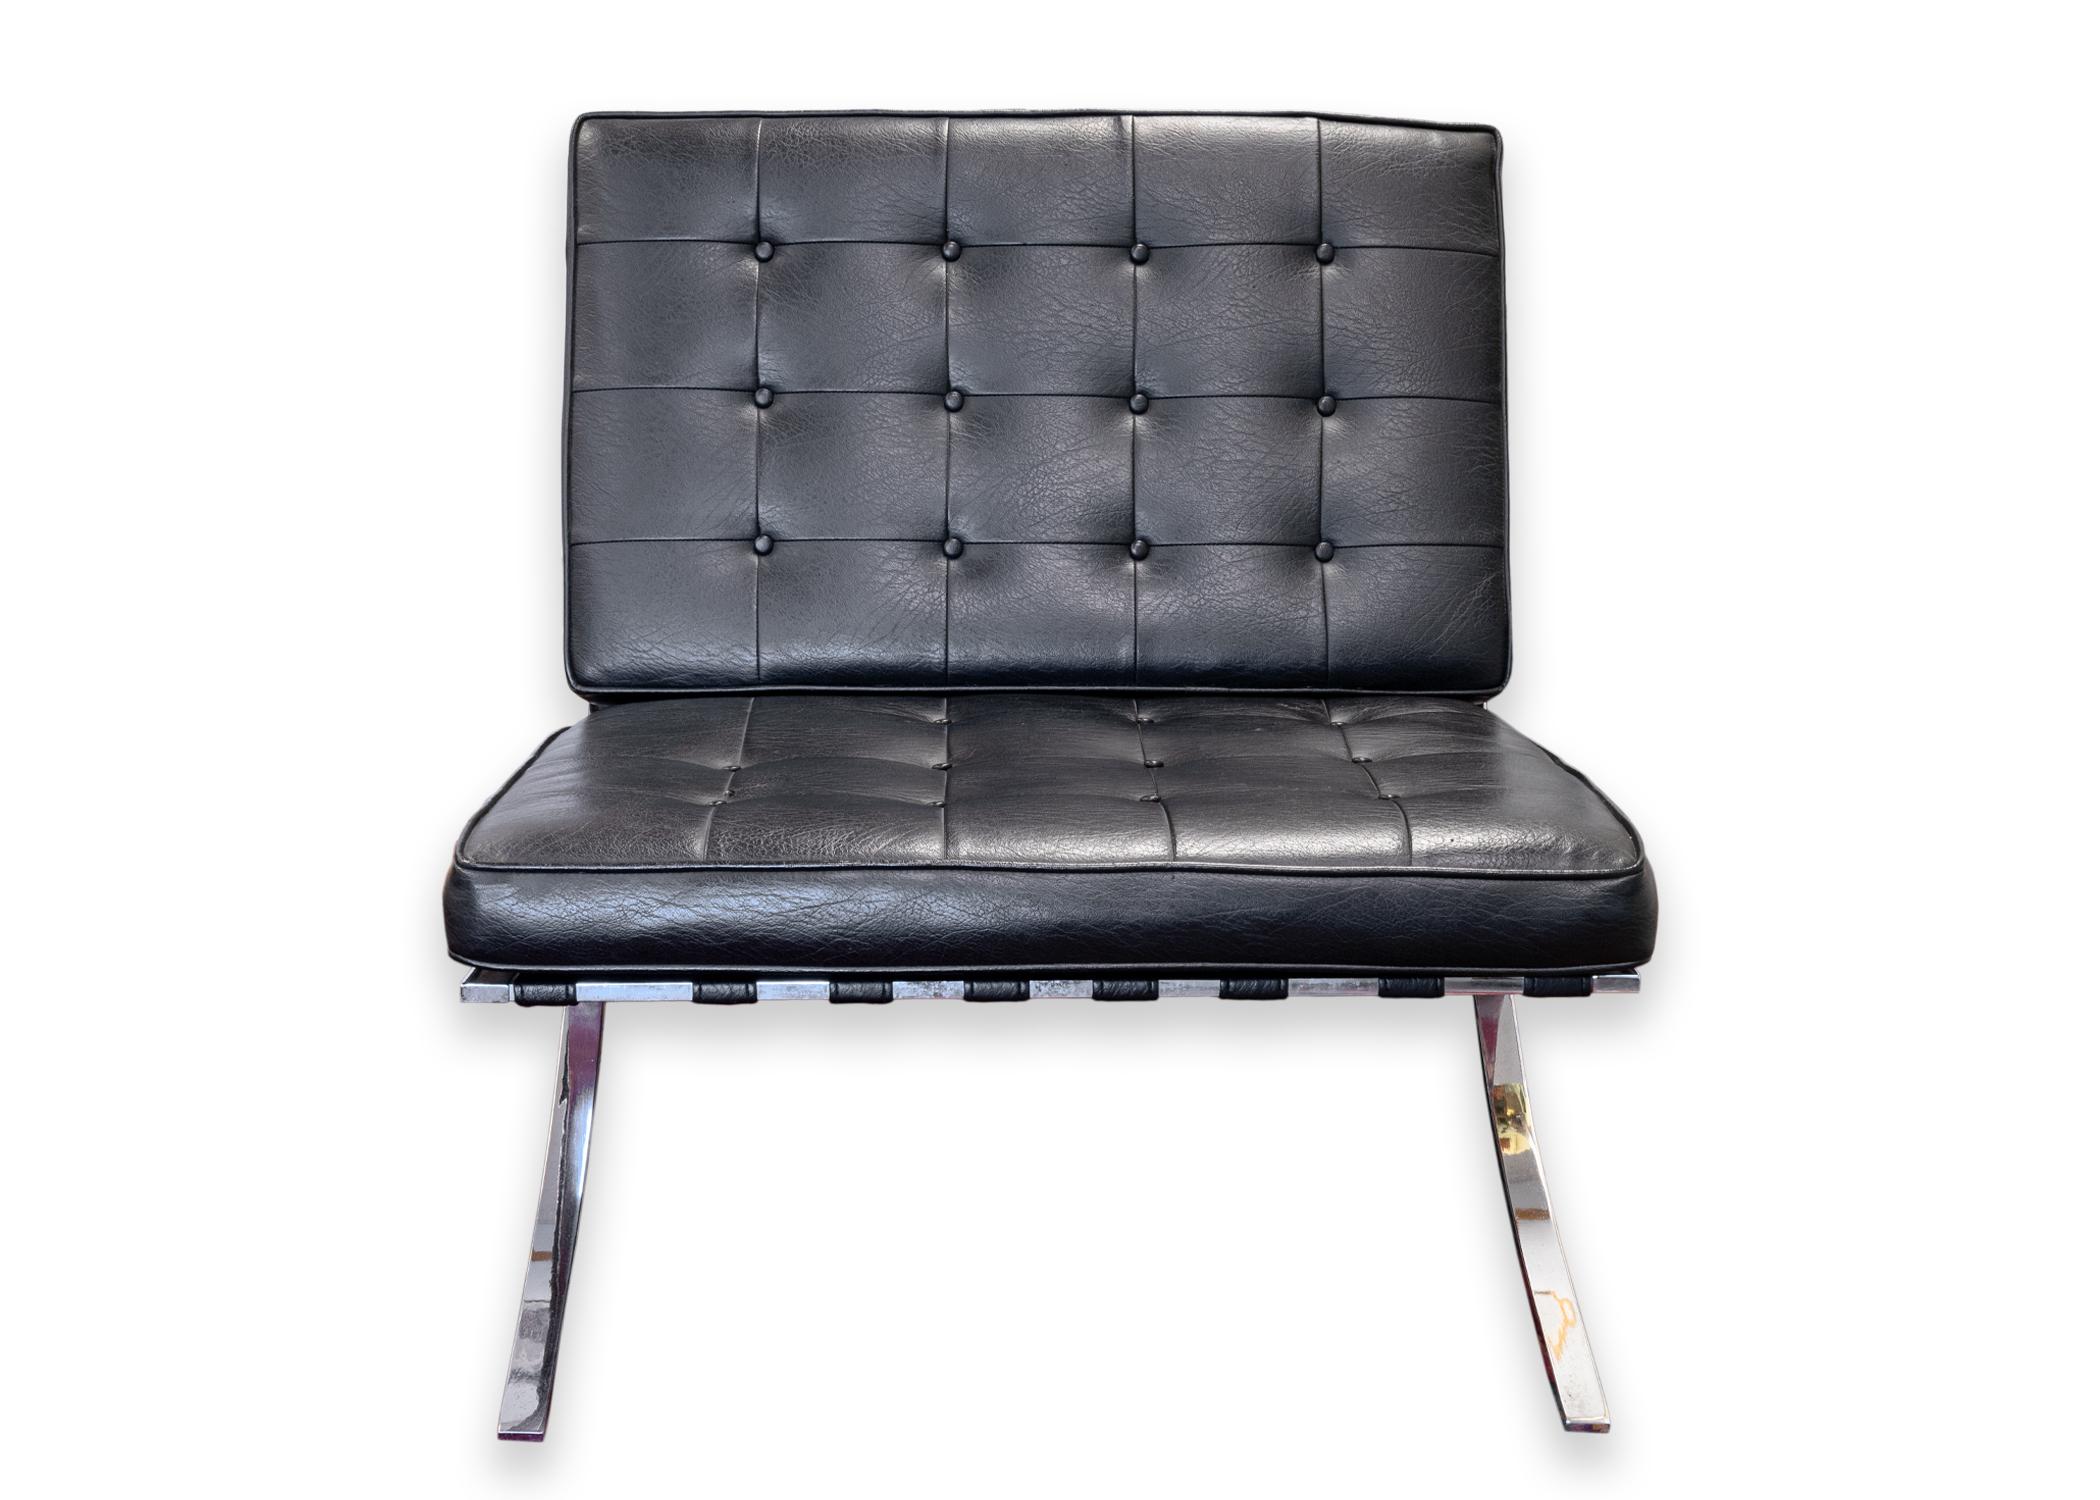 A pair of Mies van der Rohe Barcelona style accent lounge chairs. A super high quality reproduction pair of Barcelona chairs. These chairs feature black tufted leather seats and backs, and a full polished metal frame construction. Both the seat and